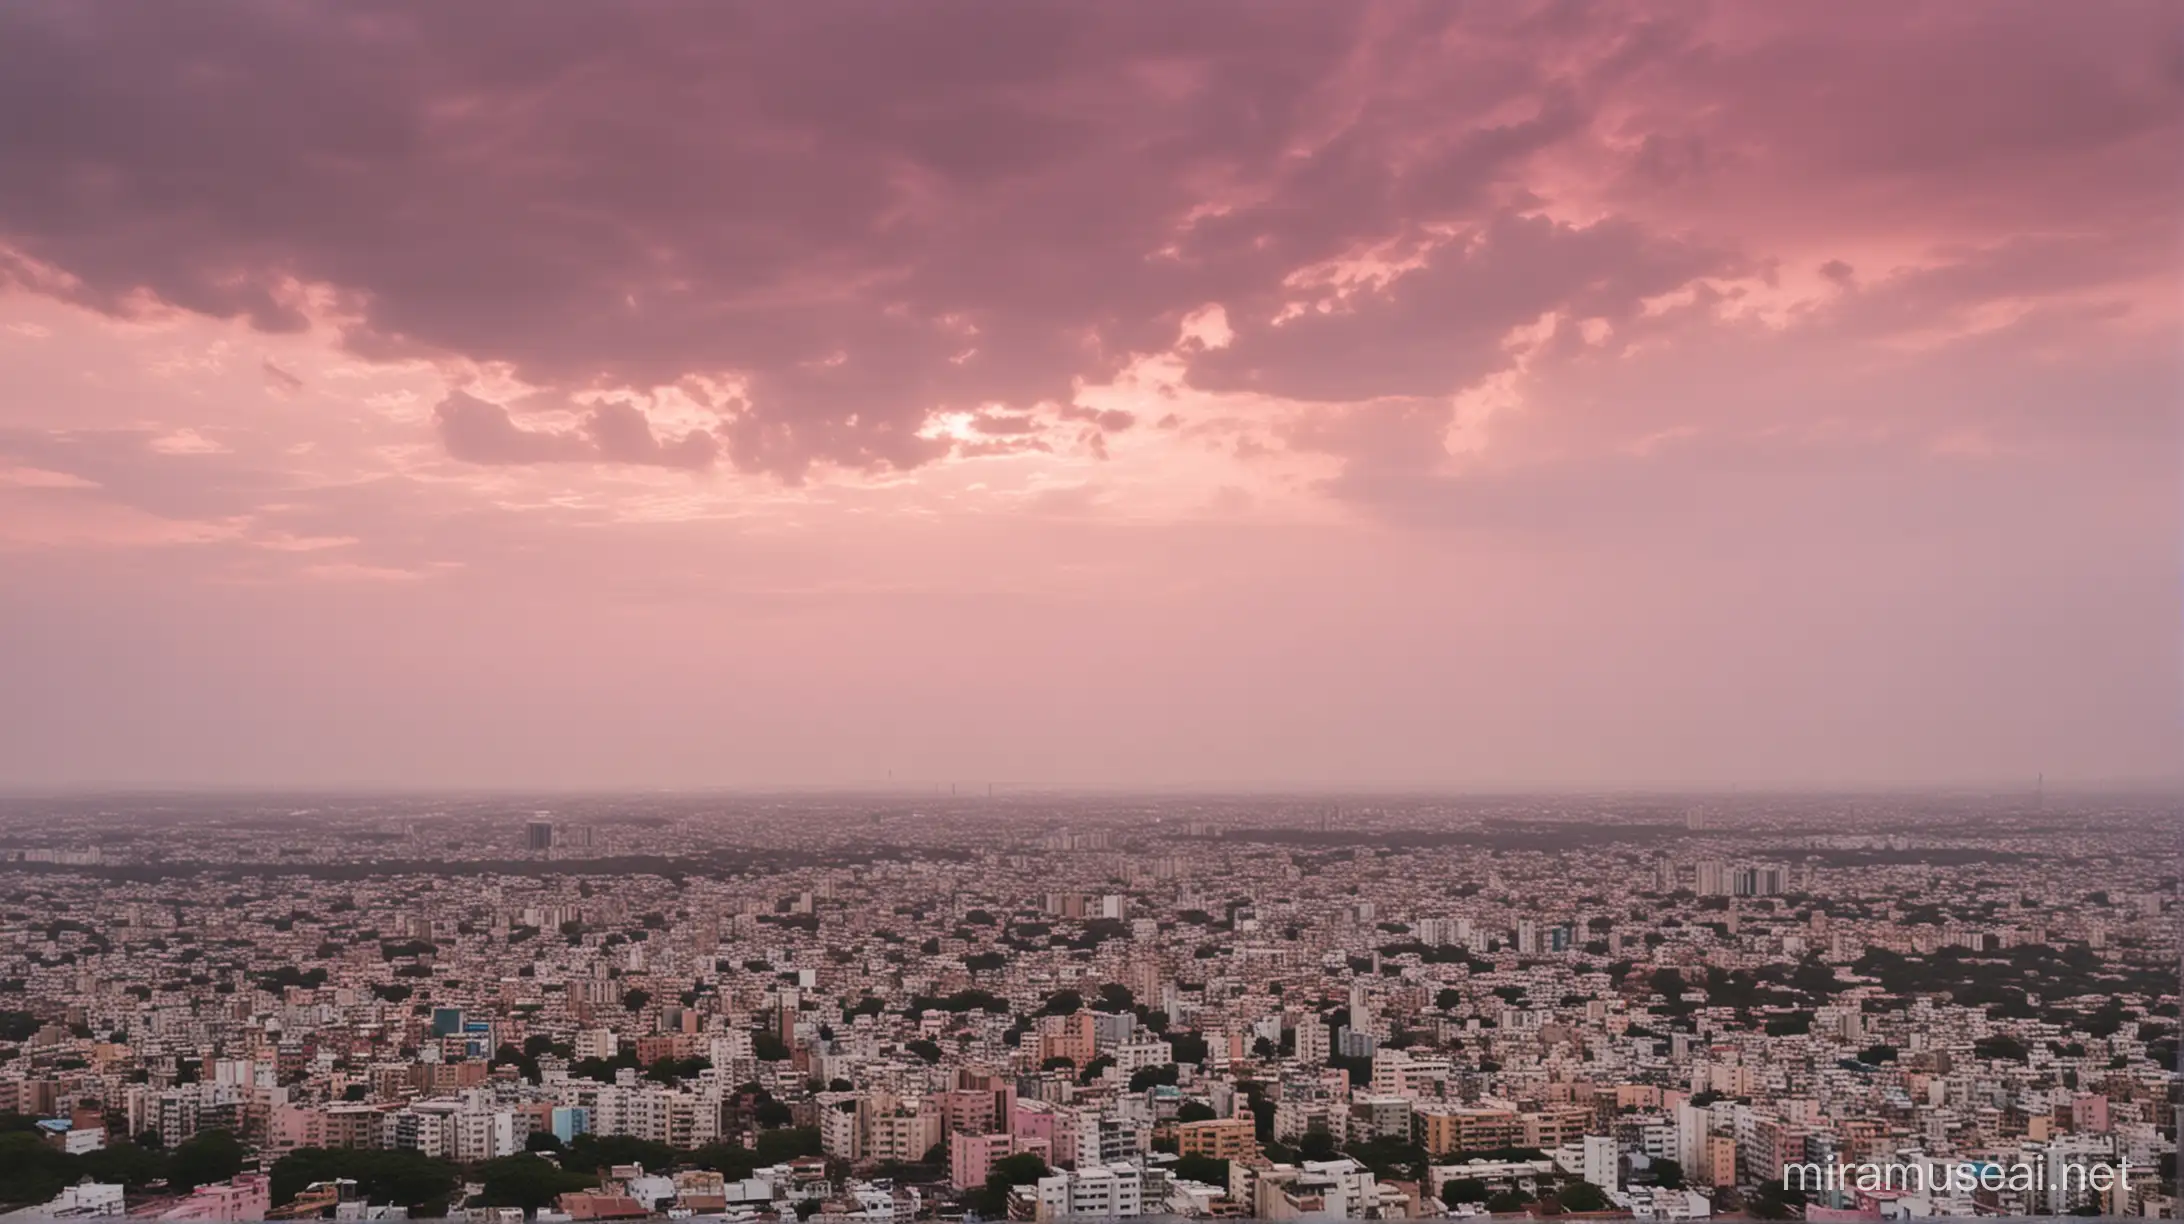 Cinematic Extreme Wide Shot of Hyderabad Cityscape with Pink Sky and Cloudy Atmosphere